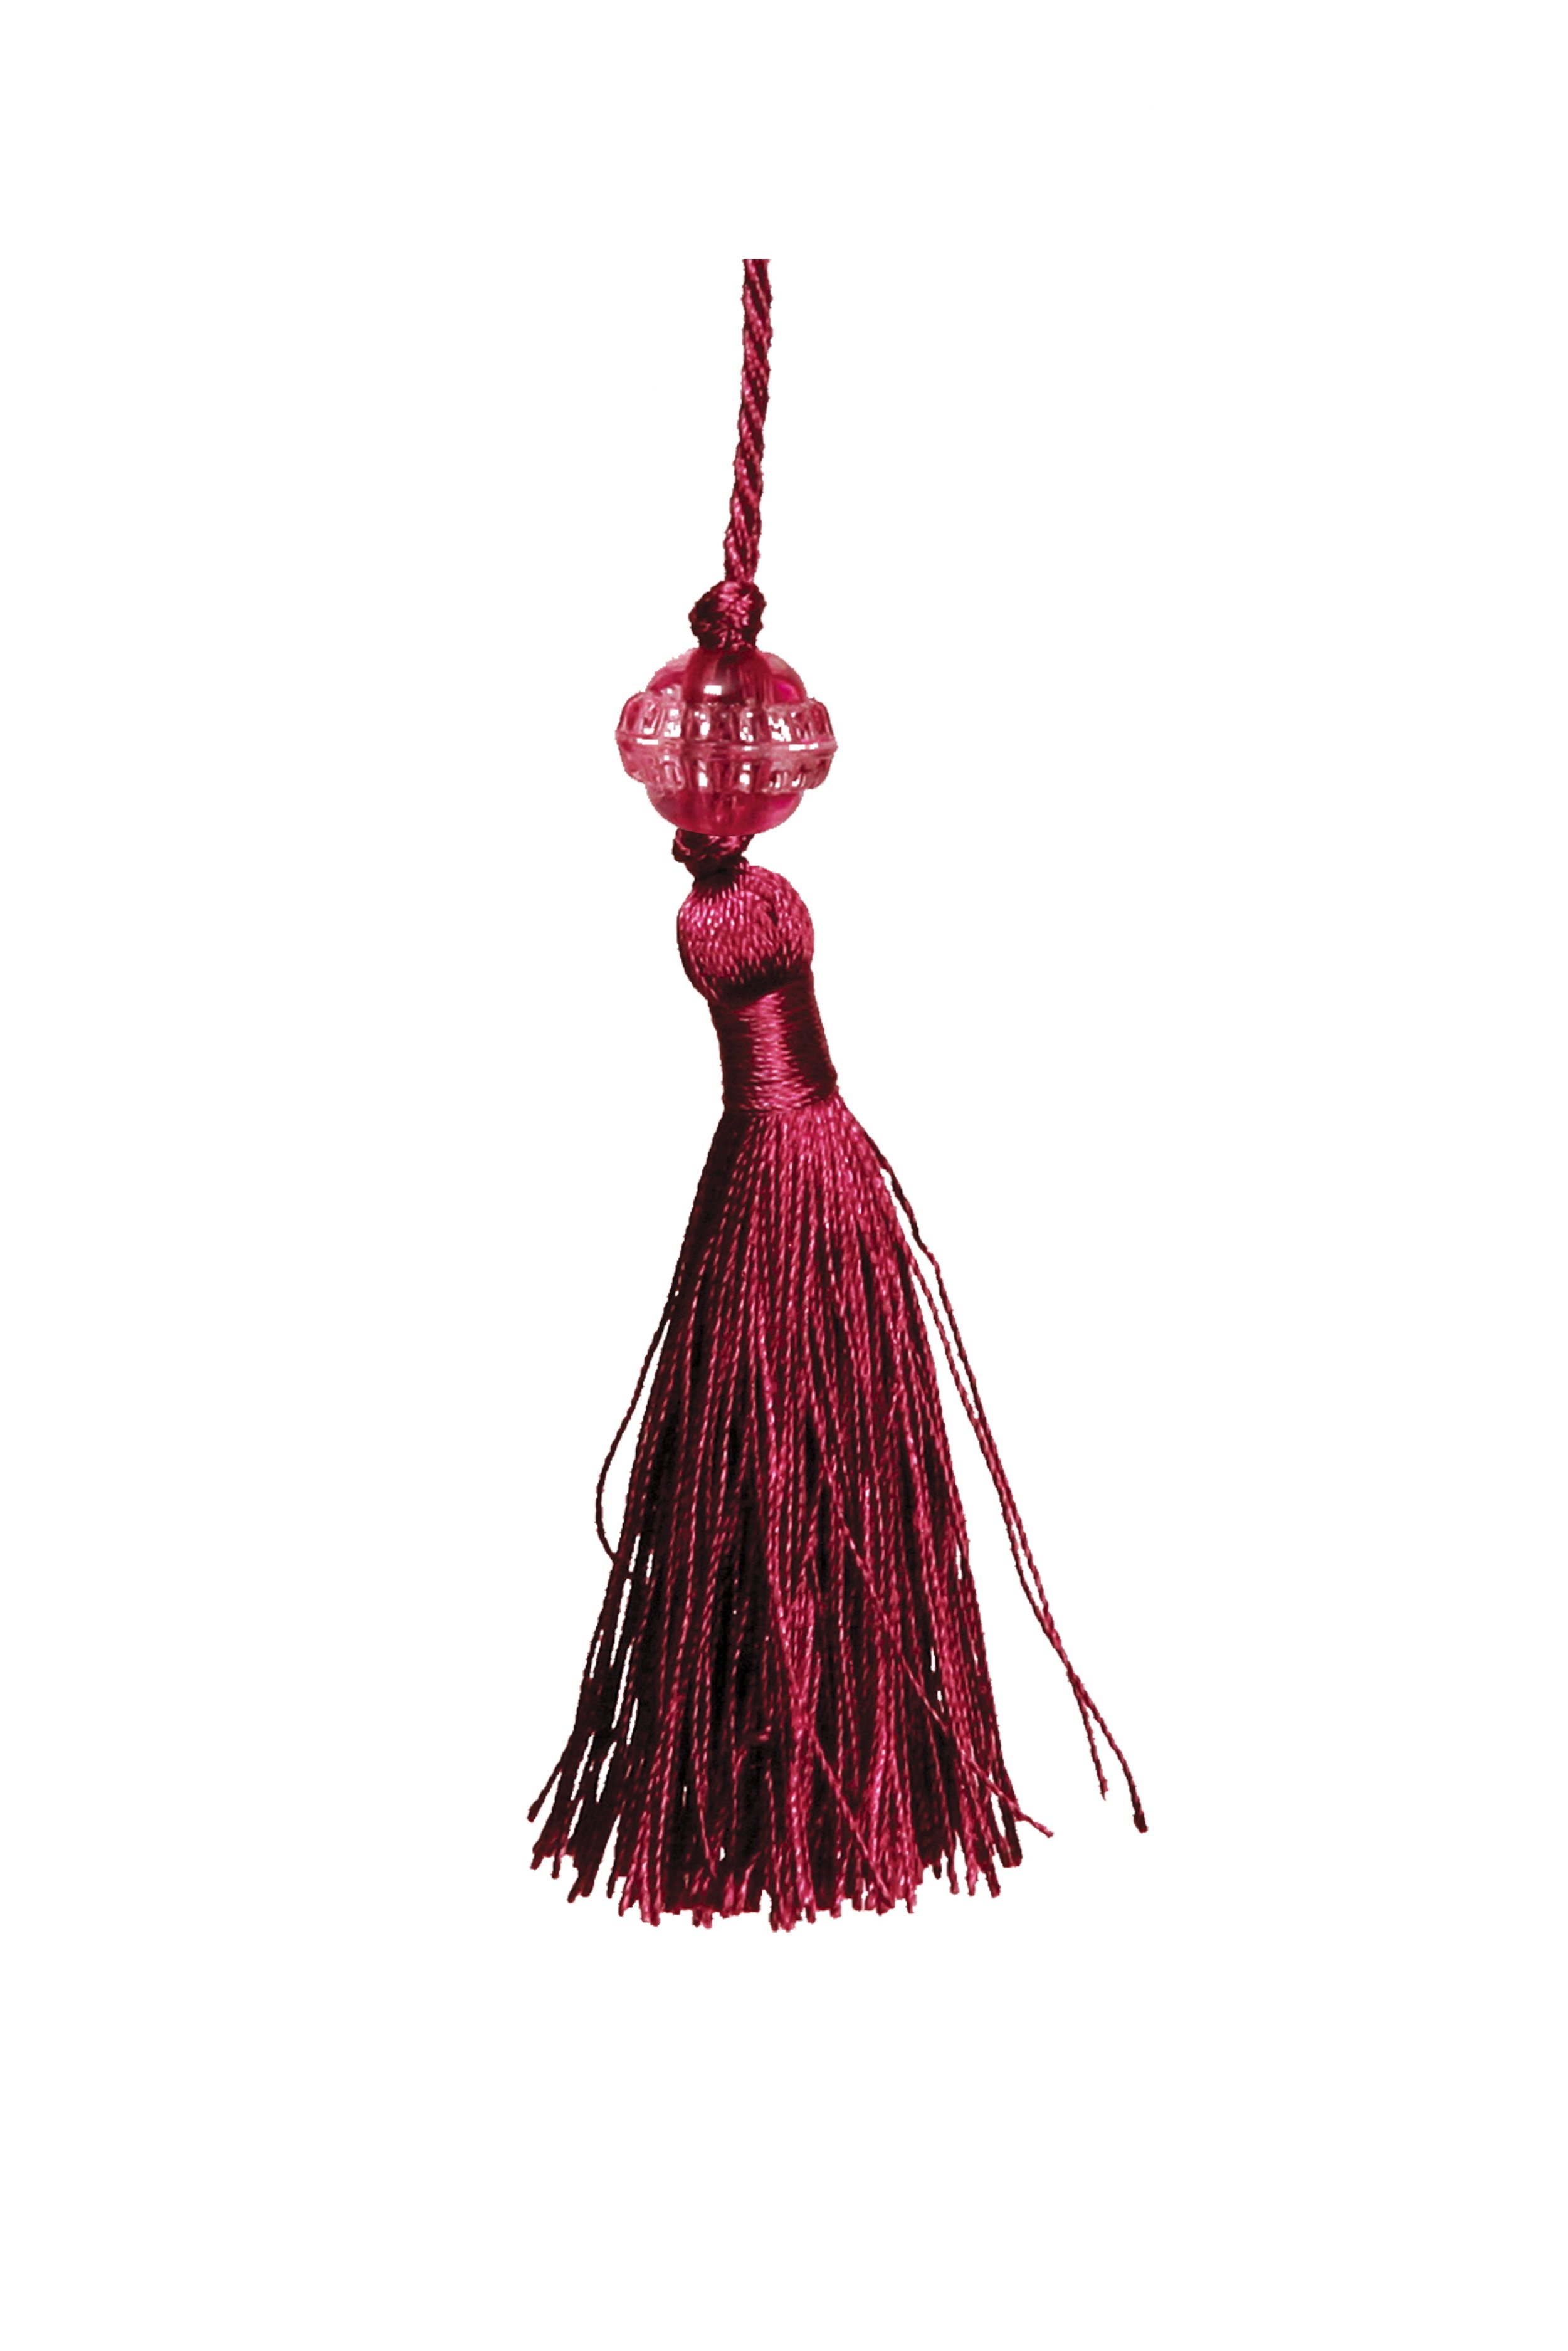 Small Tassel with Bead - Red Wine 6.5cm Pack of 5